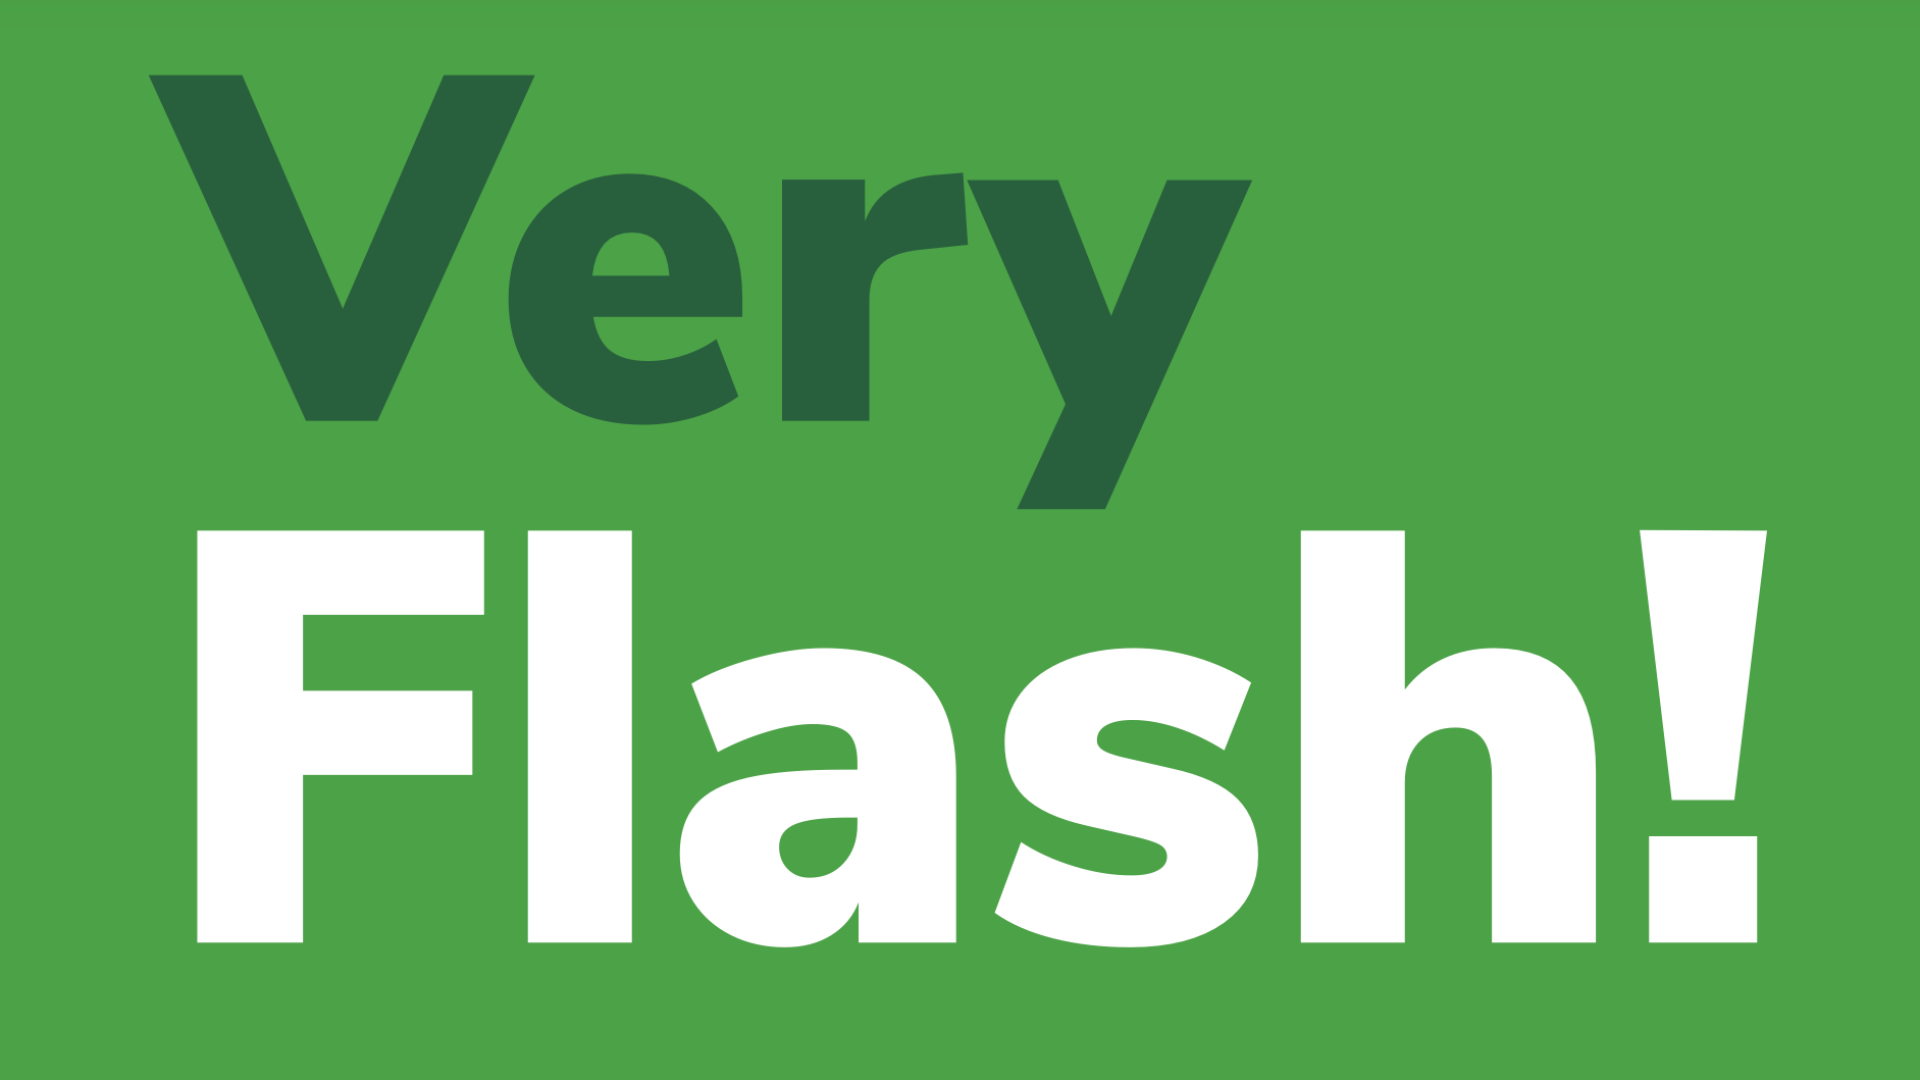 Very Mobile Flash